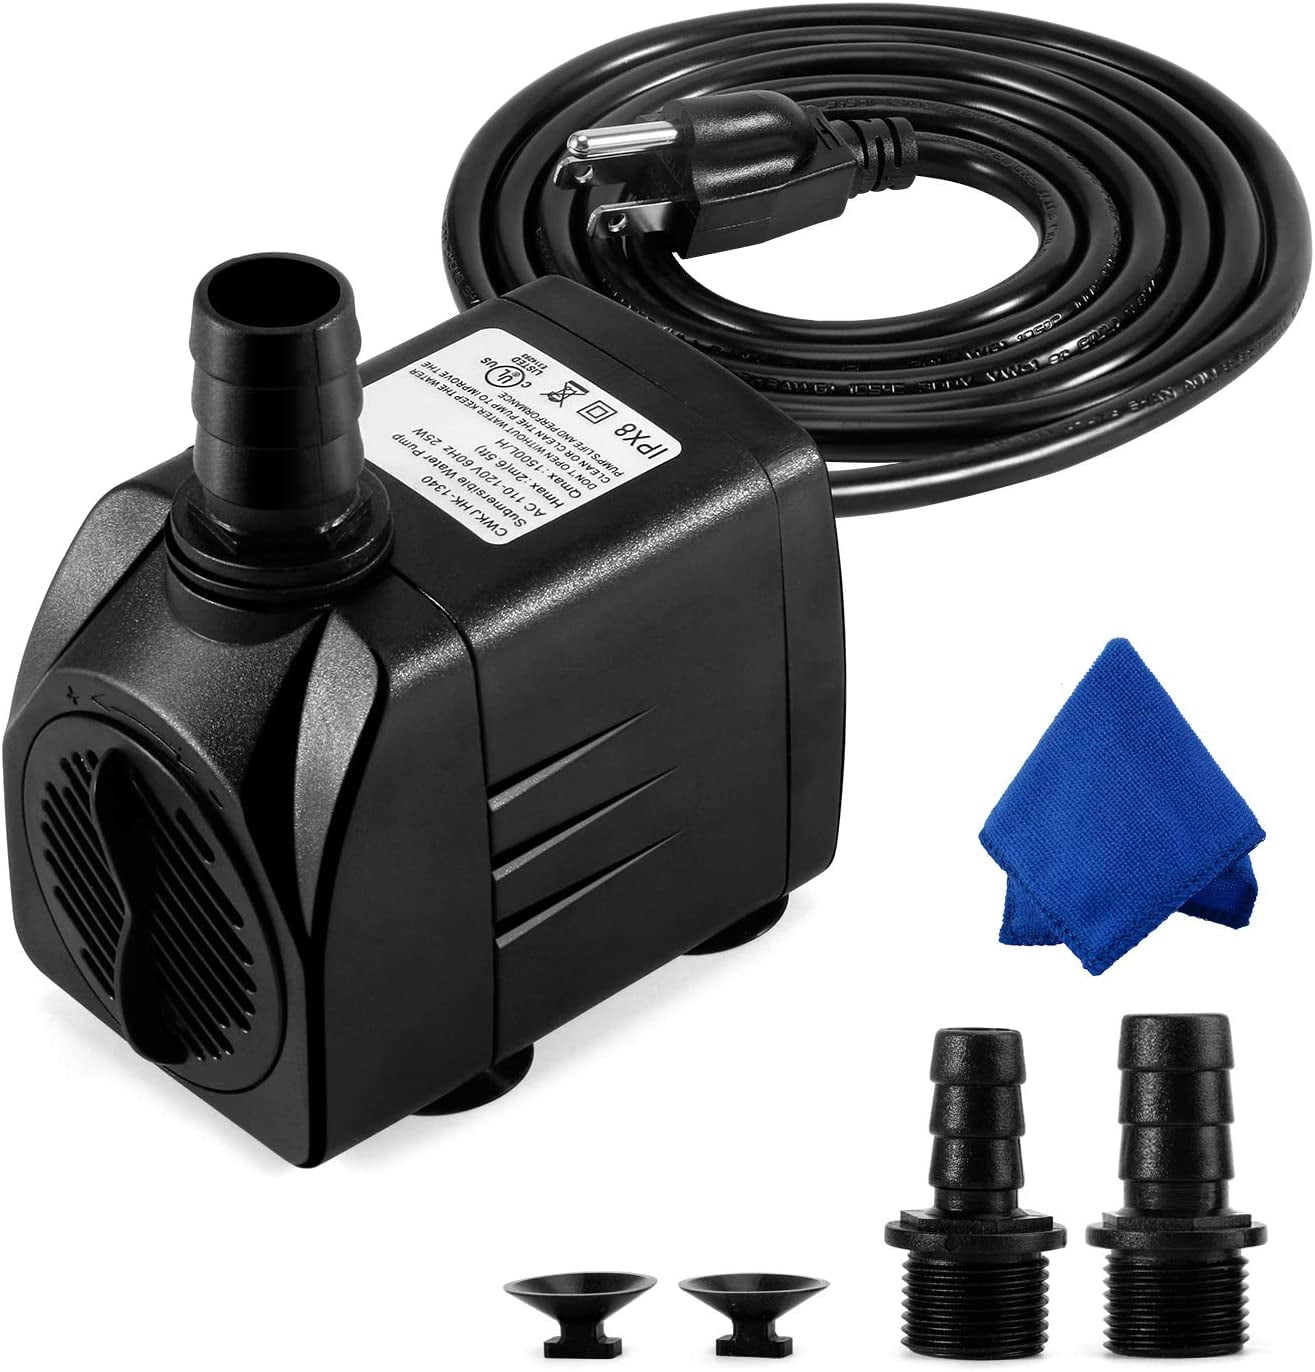 1 Pc Submersible Water Pump Durable Plastic Mini Water Pump for Ponds